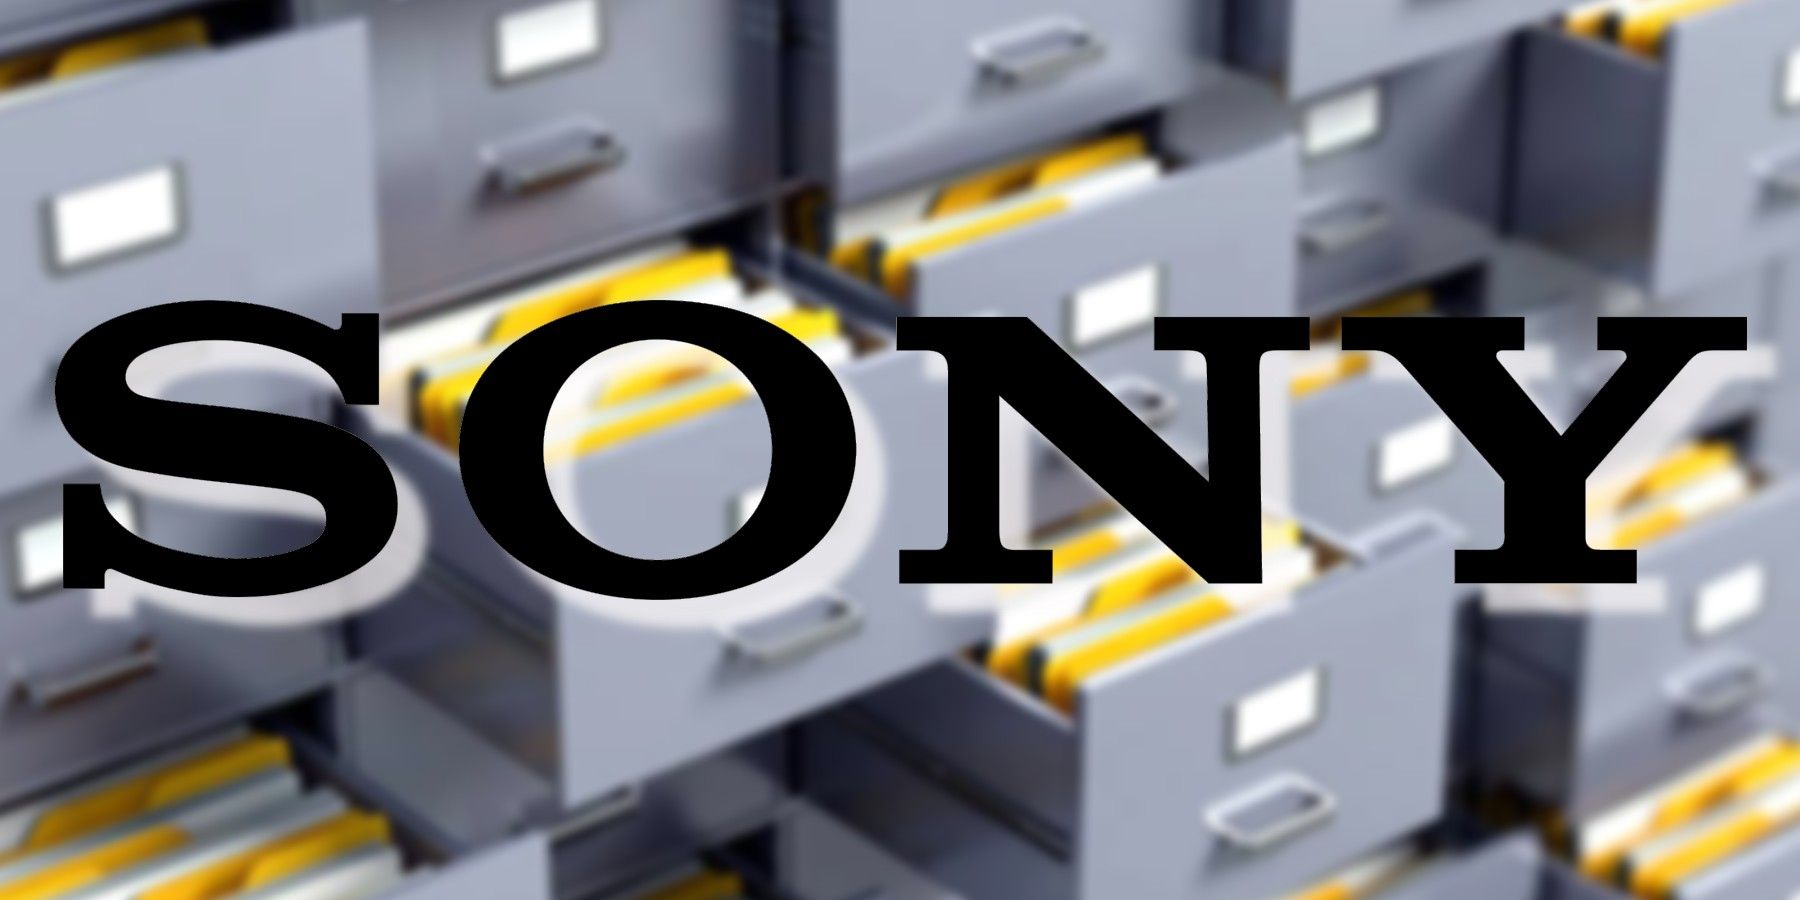 sony-logo-filing-cabinet-blurred-background